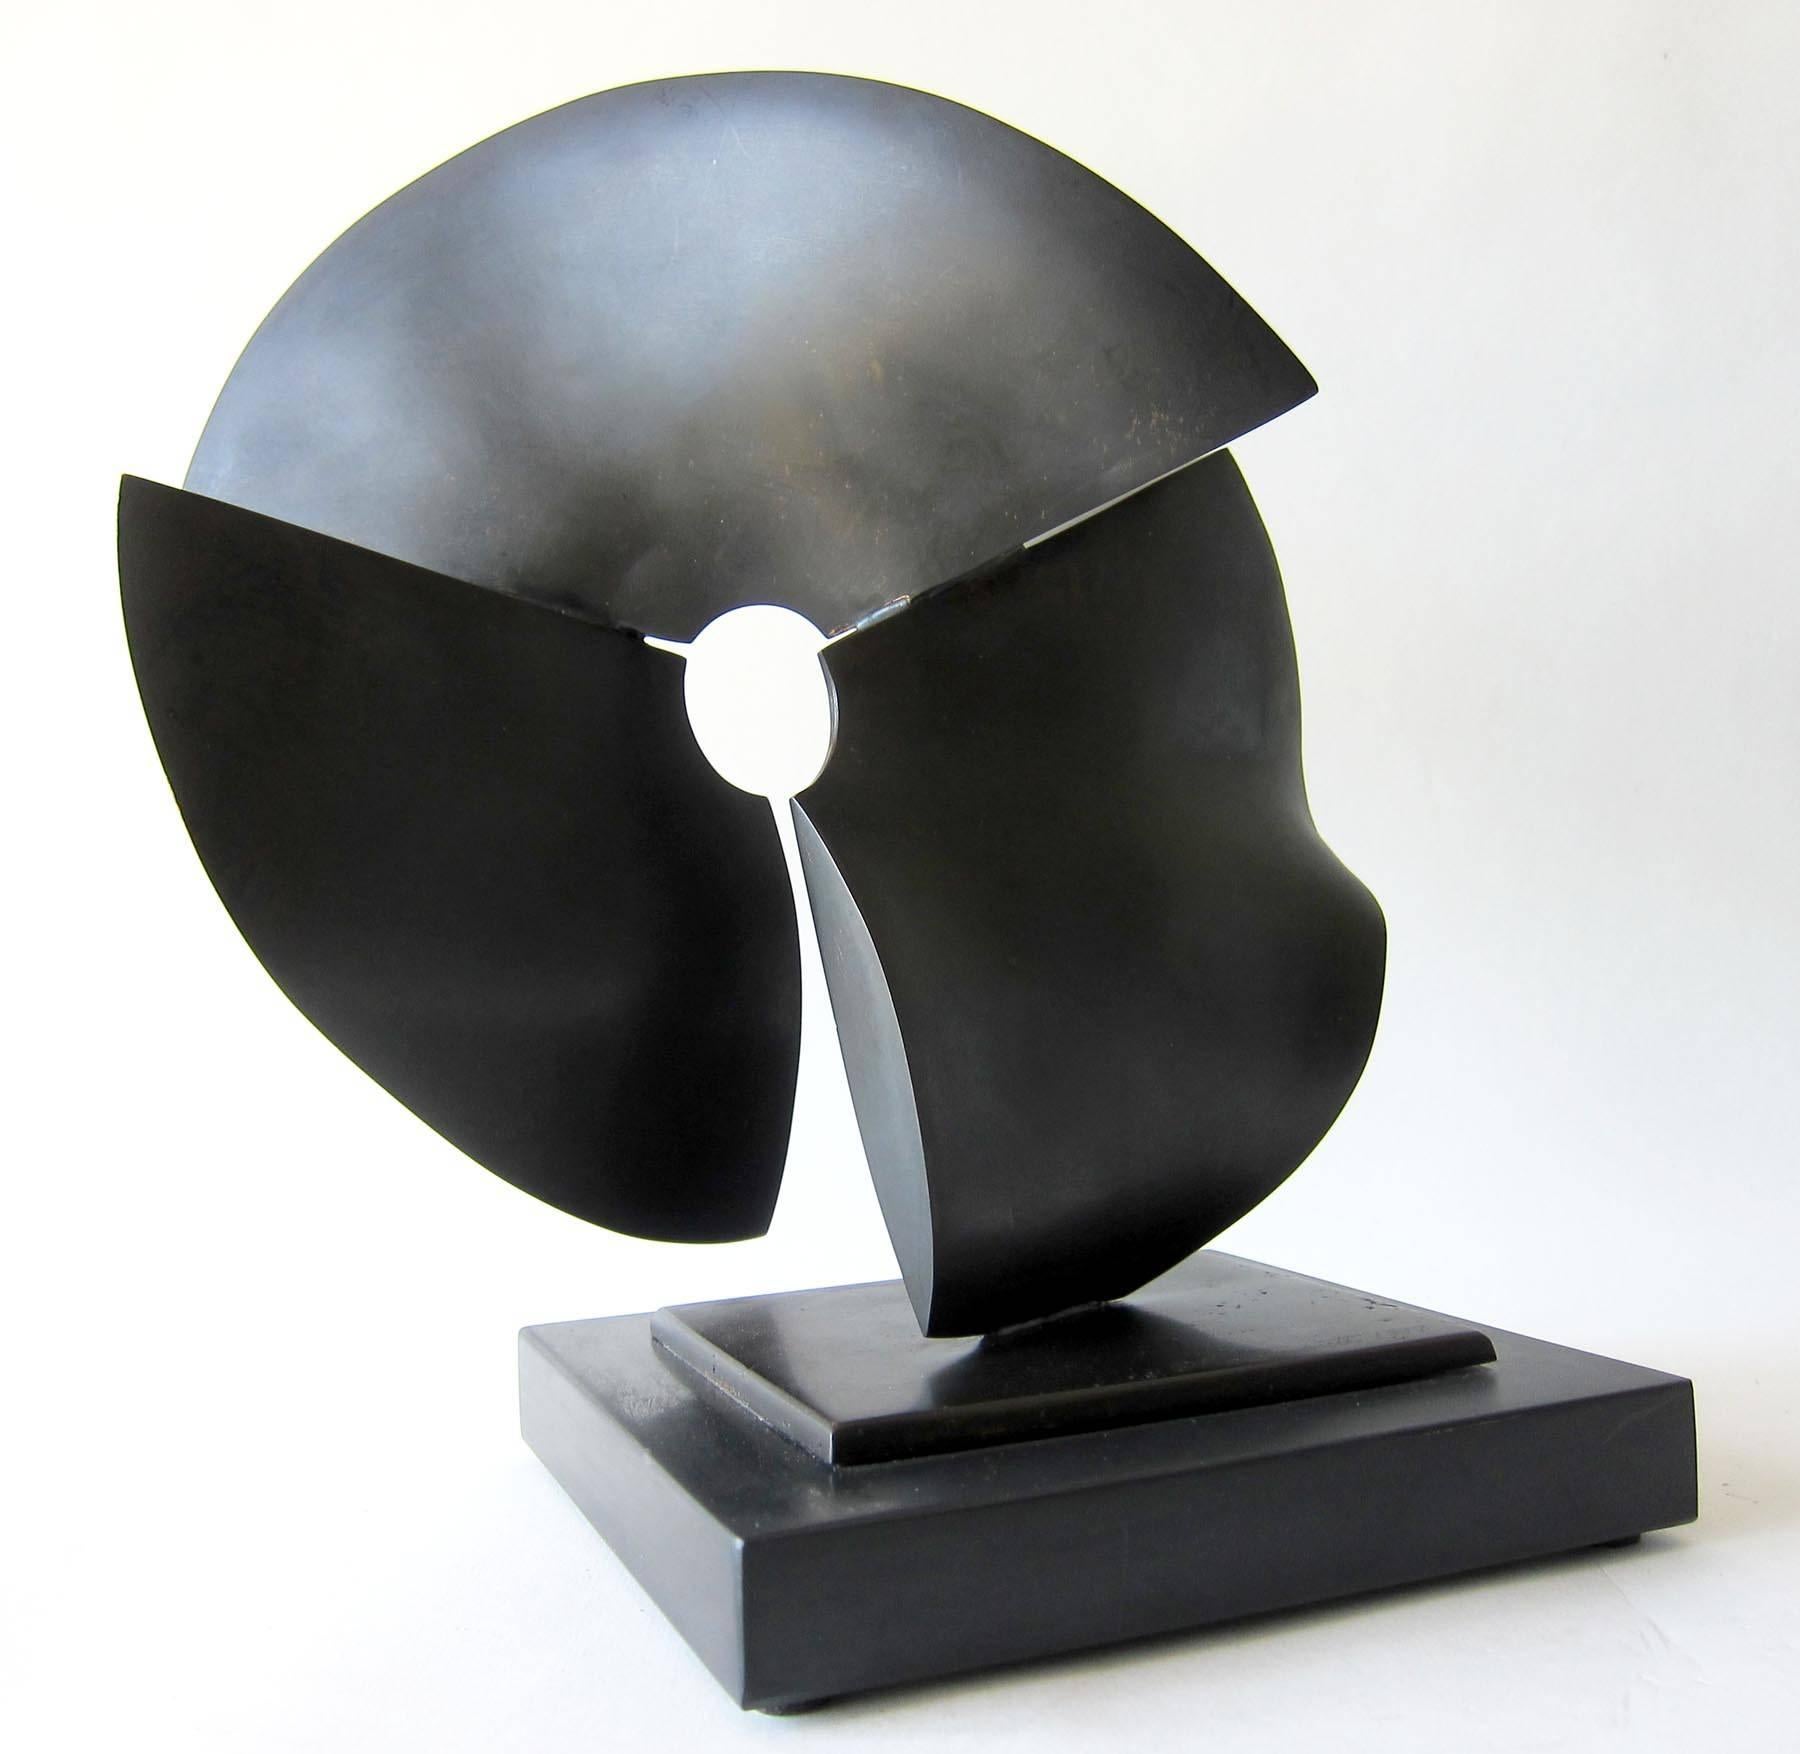 Patinated solid bronze broken circular form sculpture created by Ron Bennett, of Pittsburgh, Pennsylvania.  Sculpture measures 12